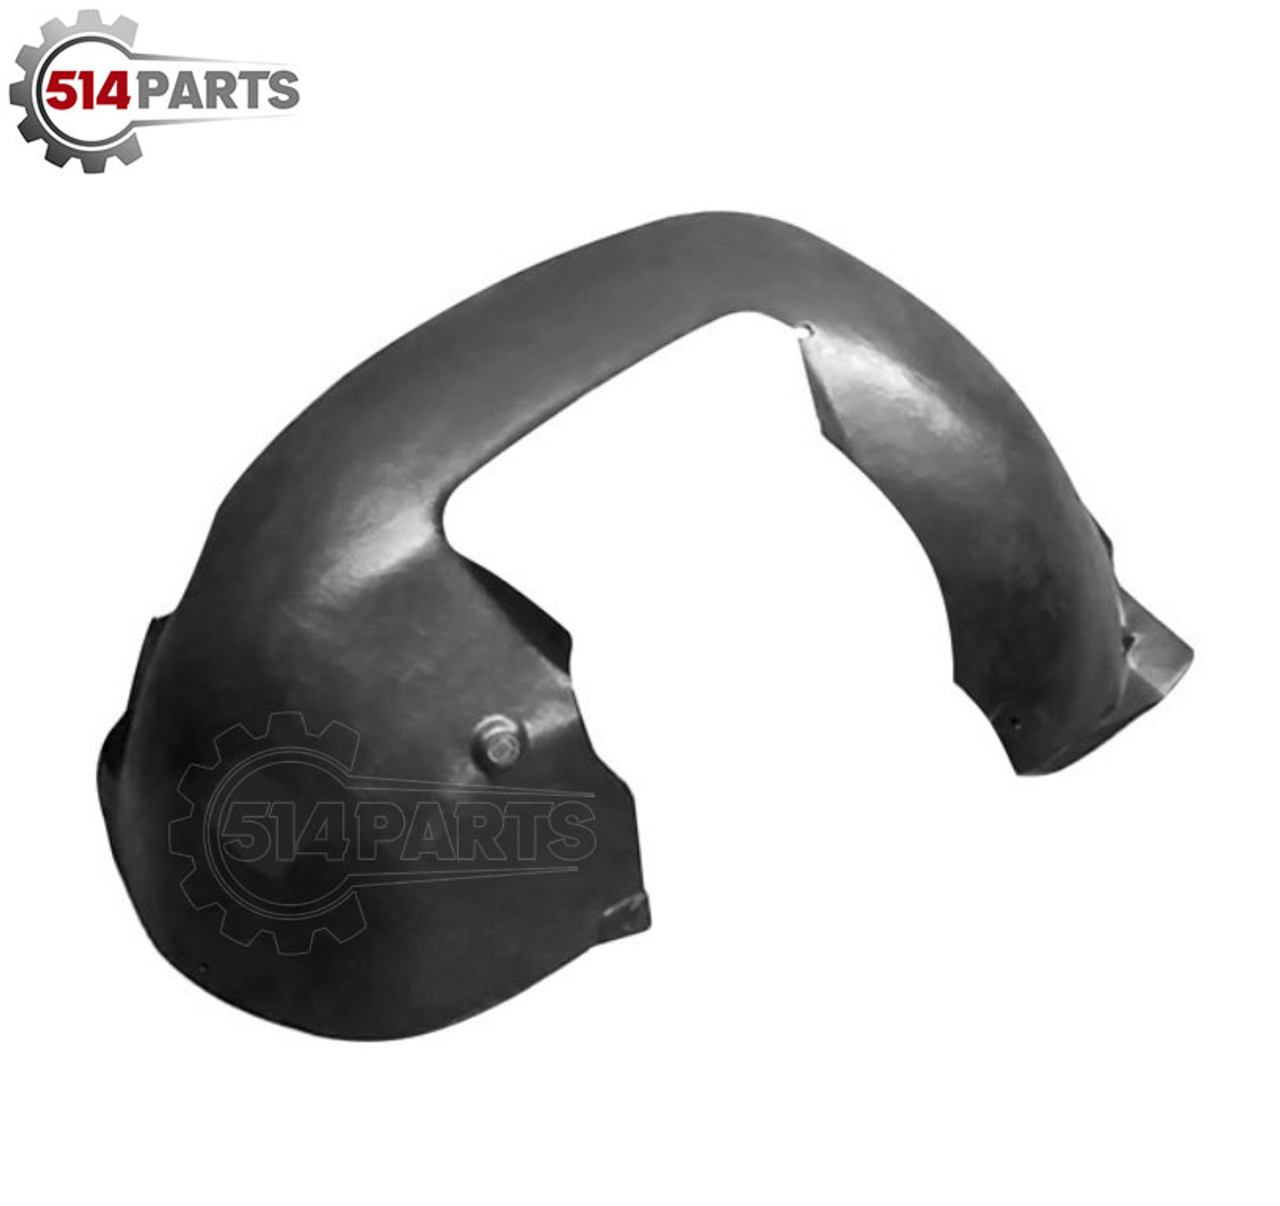 2010 - 2014 VOLKSWAGEN GTI FENDER LINER REAR SECTION - FAUSSE AILE